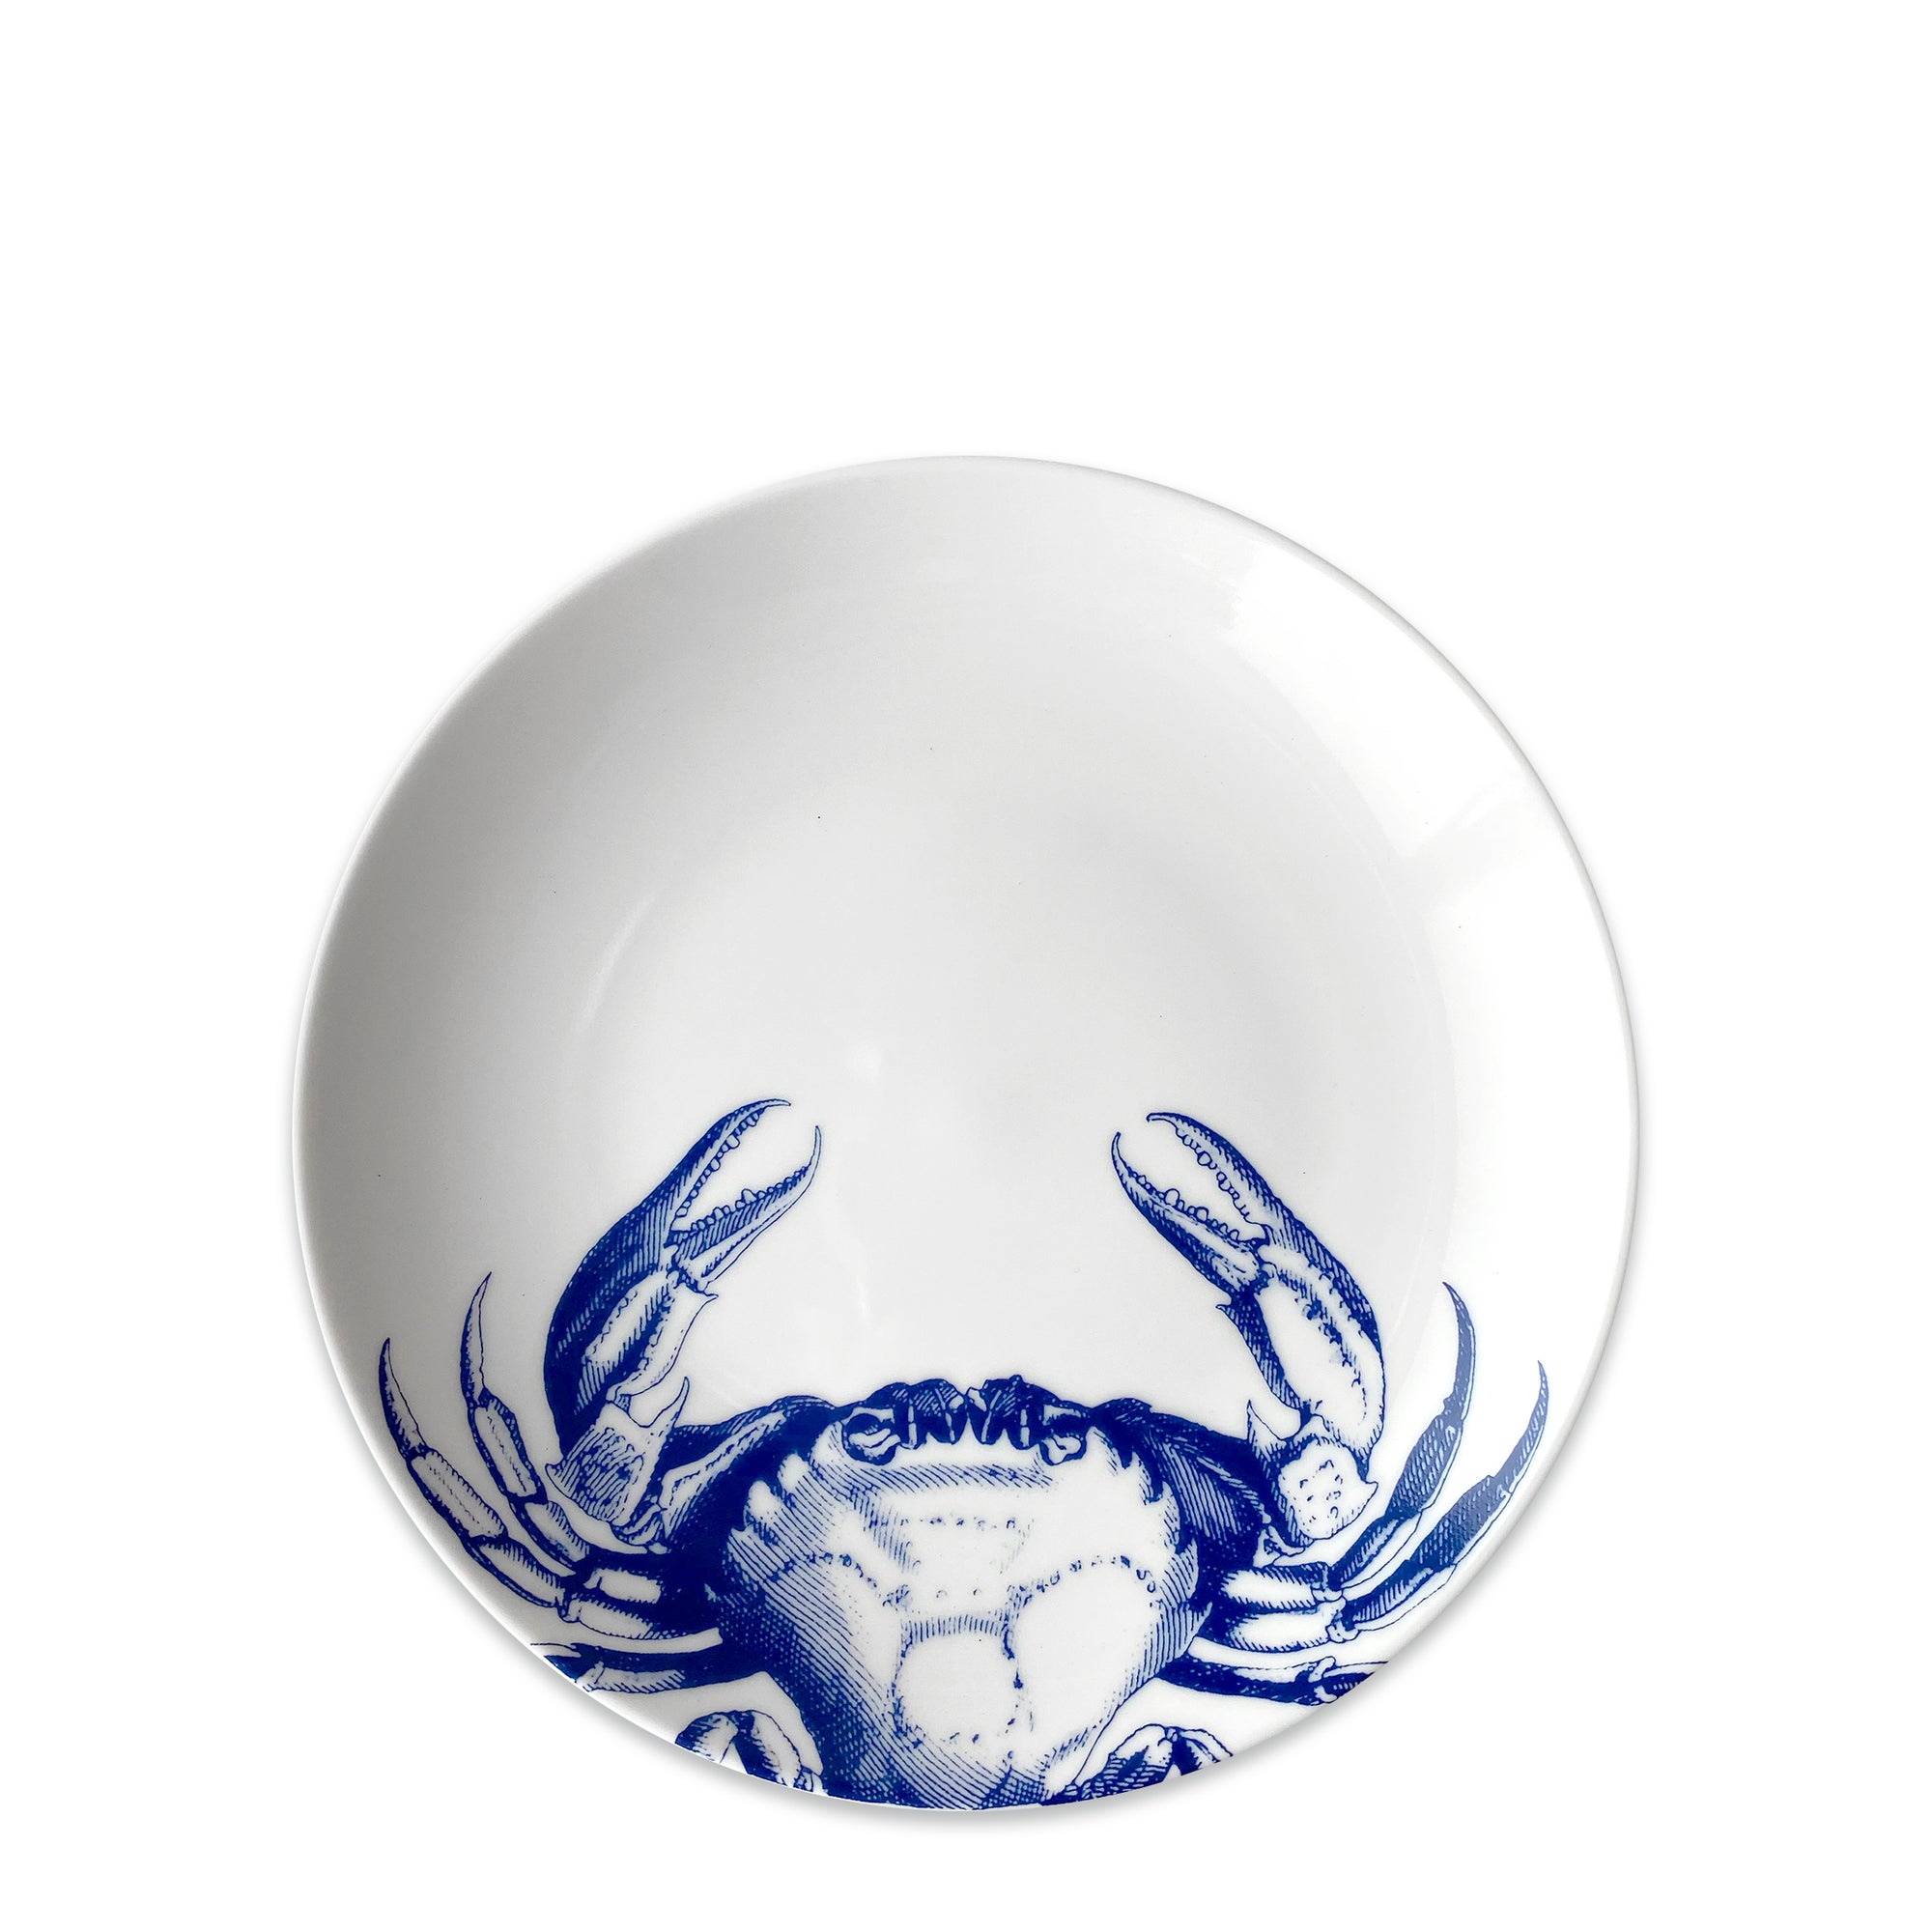 A Crab Coupe Salad Plate by Caskata Artisanal Home, made of premium porcelain, features a detailed blue crab pattern at the bottom.